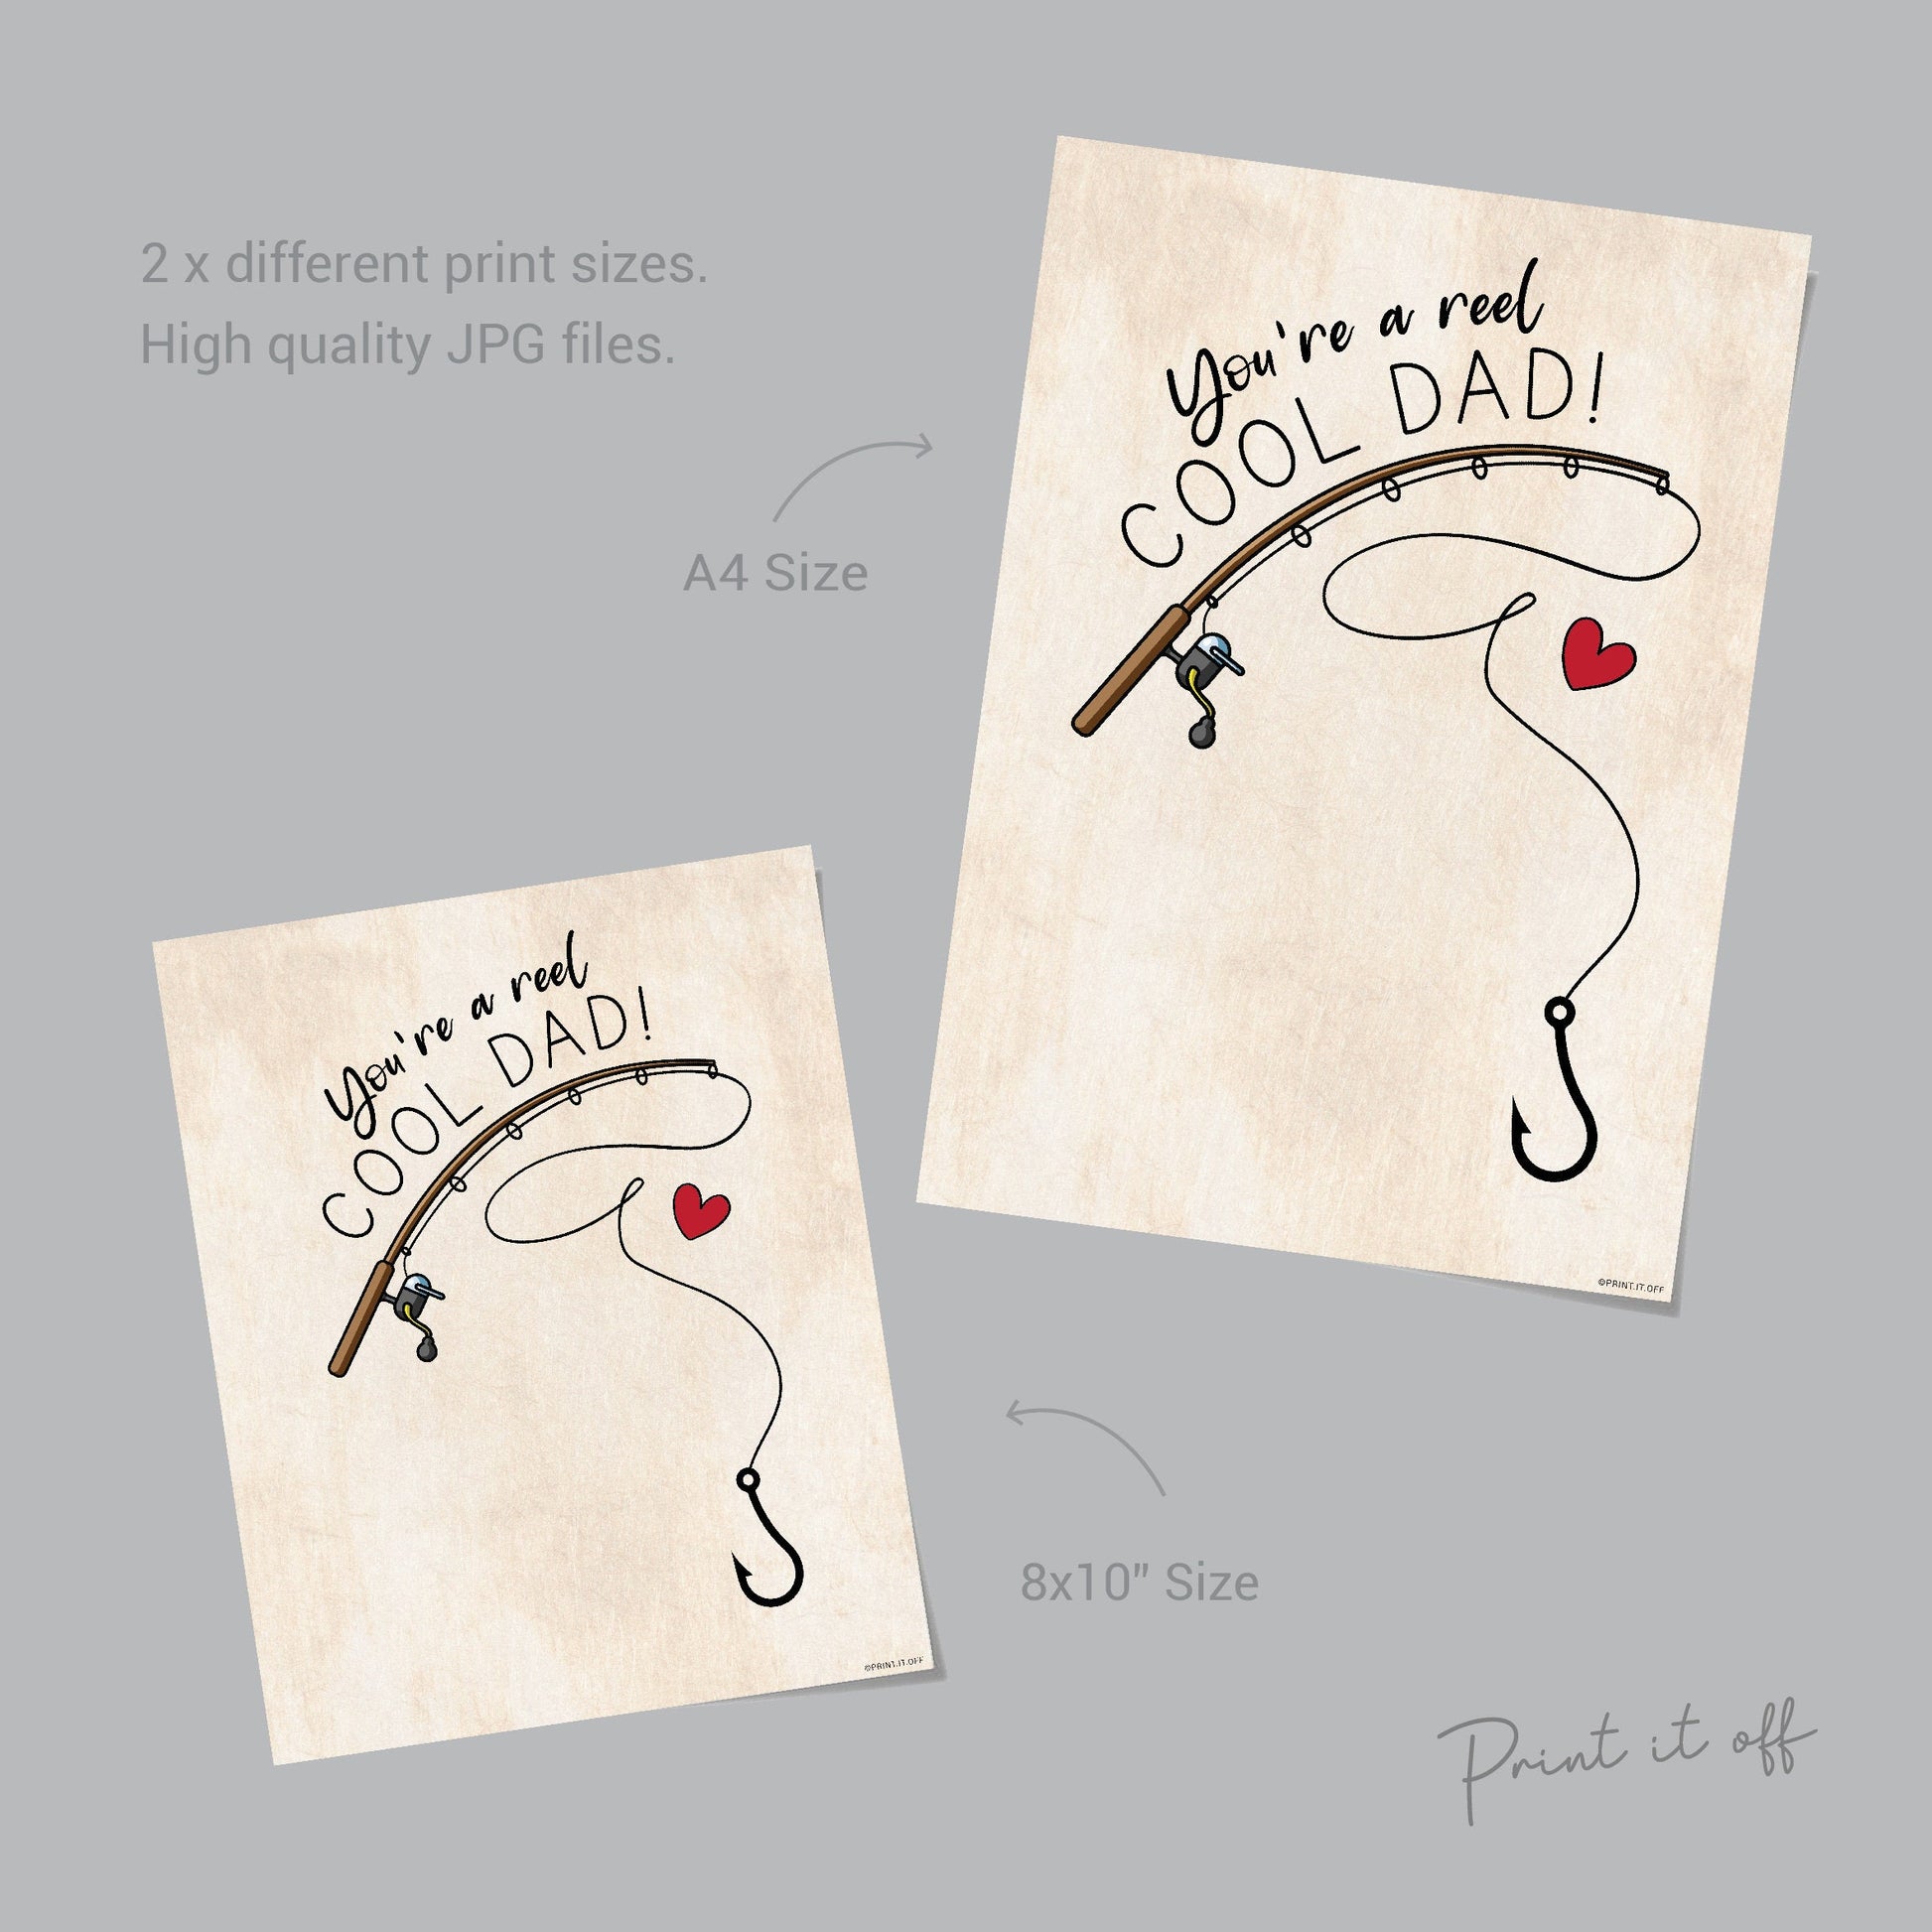 Your a Reel Cool Dad / Fish Hand Handprint Art / Father's Day Birthday Dad Daddy / Kids Baby Toddler / Keepsake Craft DIY Card Print 0230